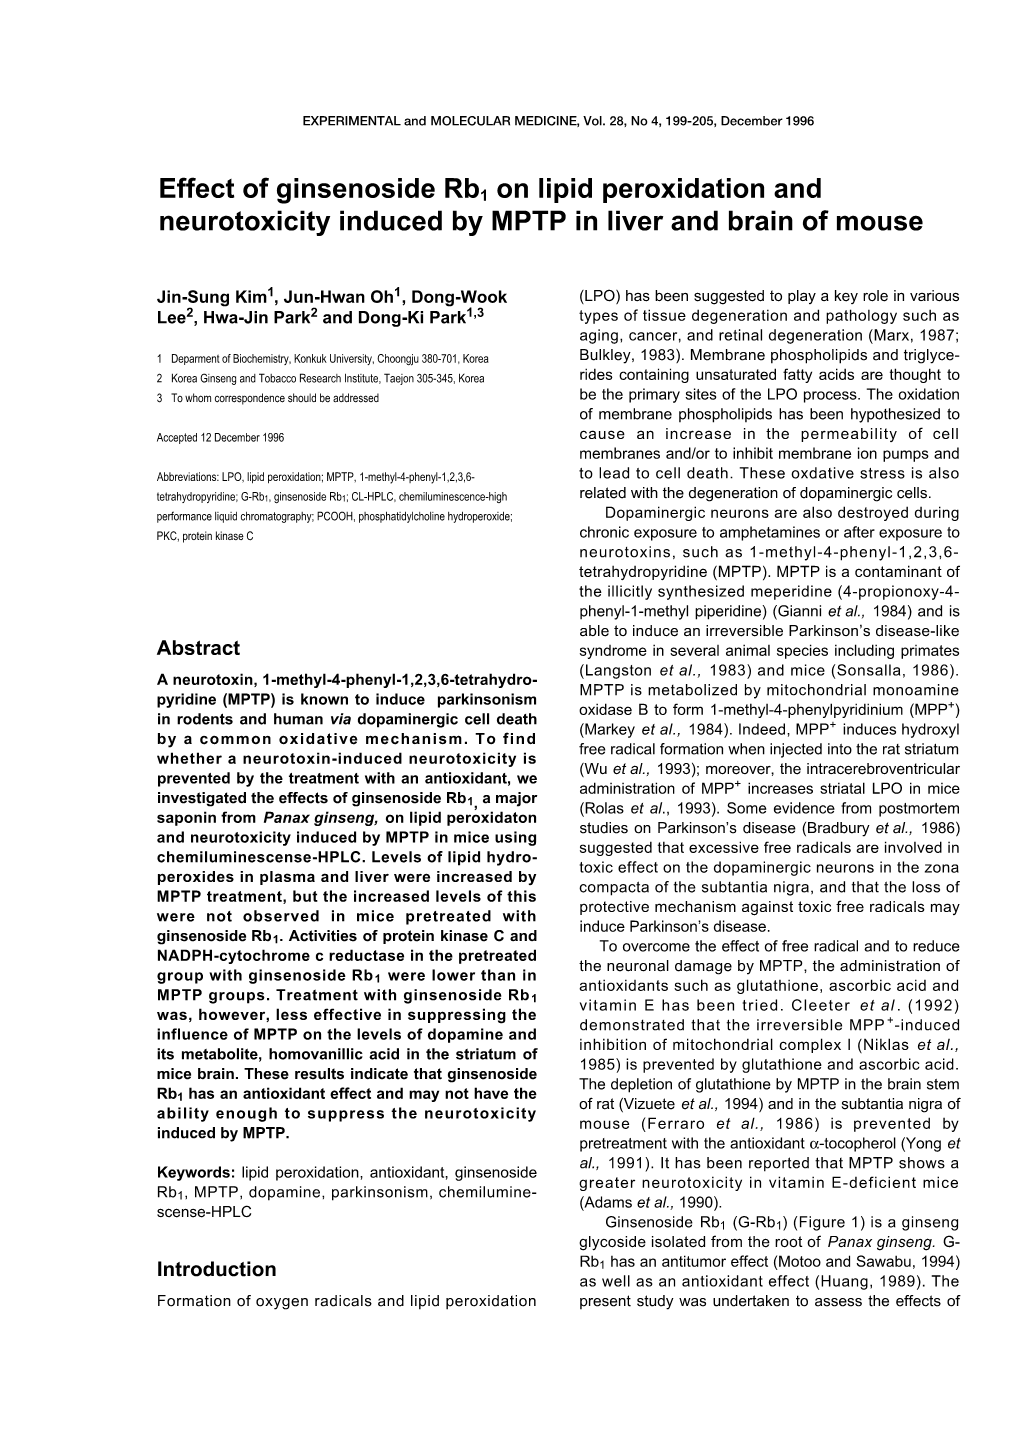 Effect of Ginsenoside Rb1 on Lipid Peroxidation and Neurotoxicity Induced by MPTP in Liver and Brain of Mouse